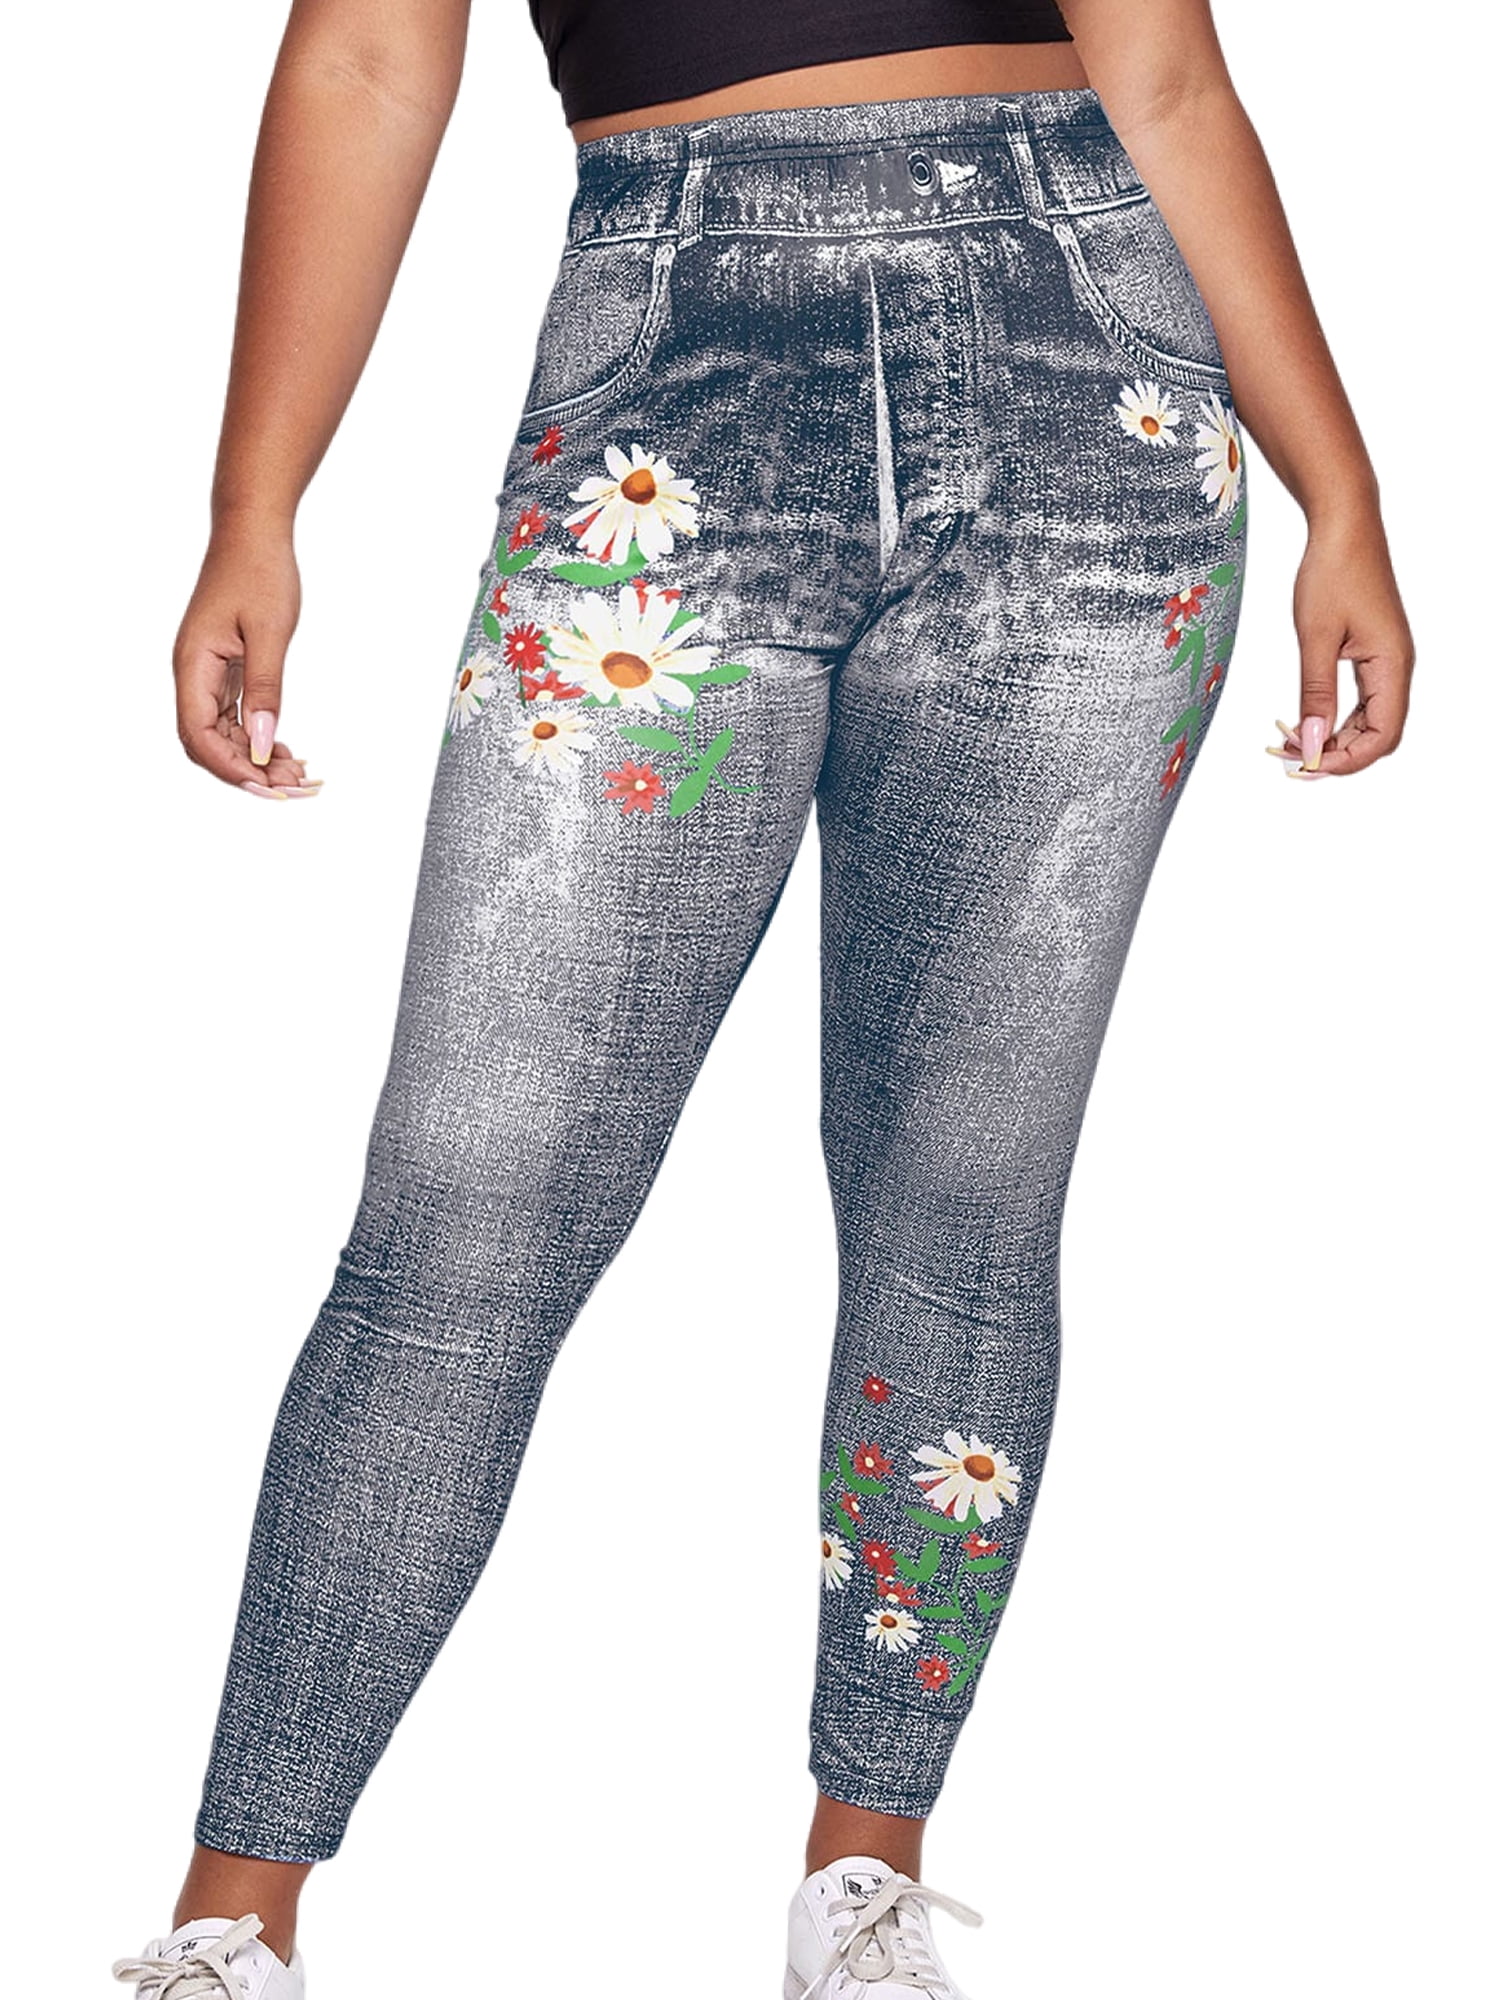 Glonme Ladies Faux Denim Pant Floral Print Plus Size Leggings High Waist  Fake Jeans Running Skinny Trousers Tight Tummy Control Jeggings Gray 4XL 